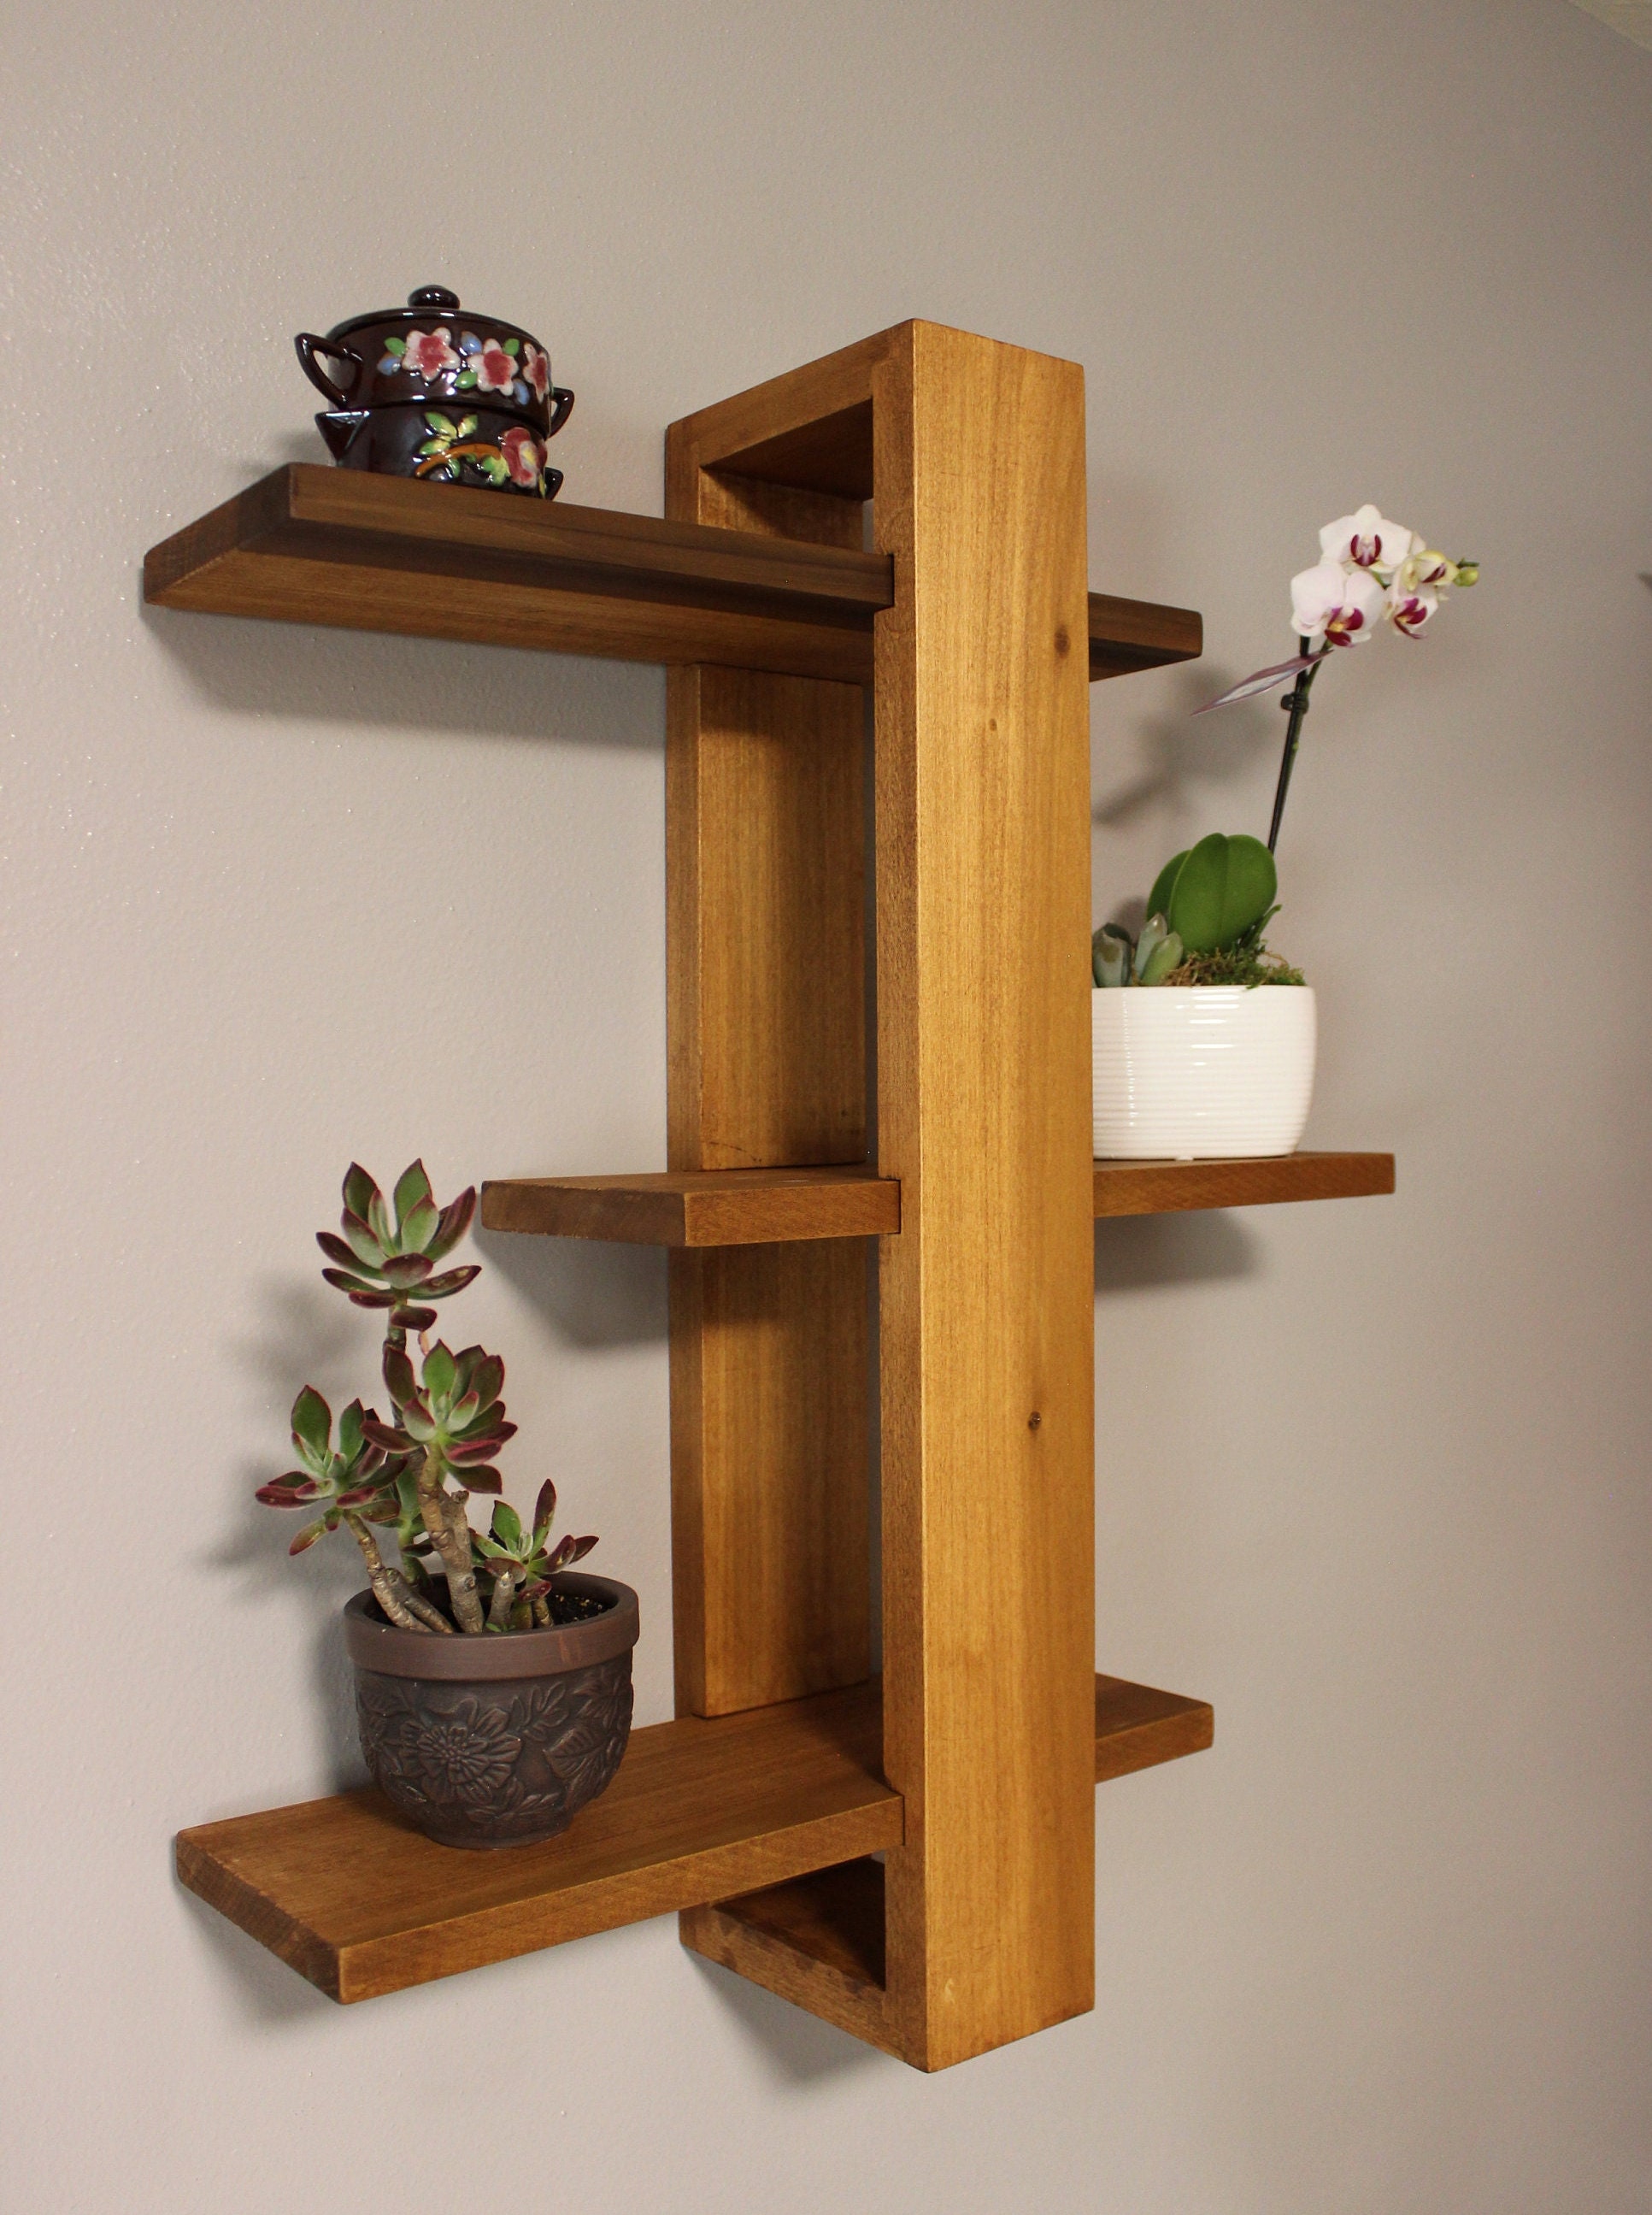 EVERMARK Expressions 4 ft. Classic Poplar Stain Grade Wood Shelf